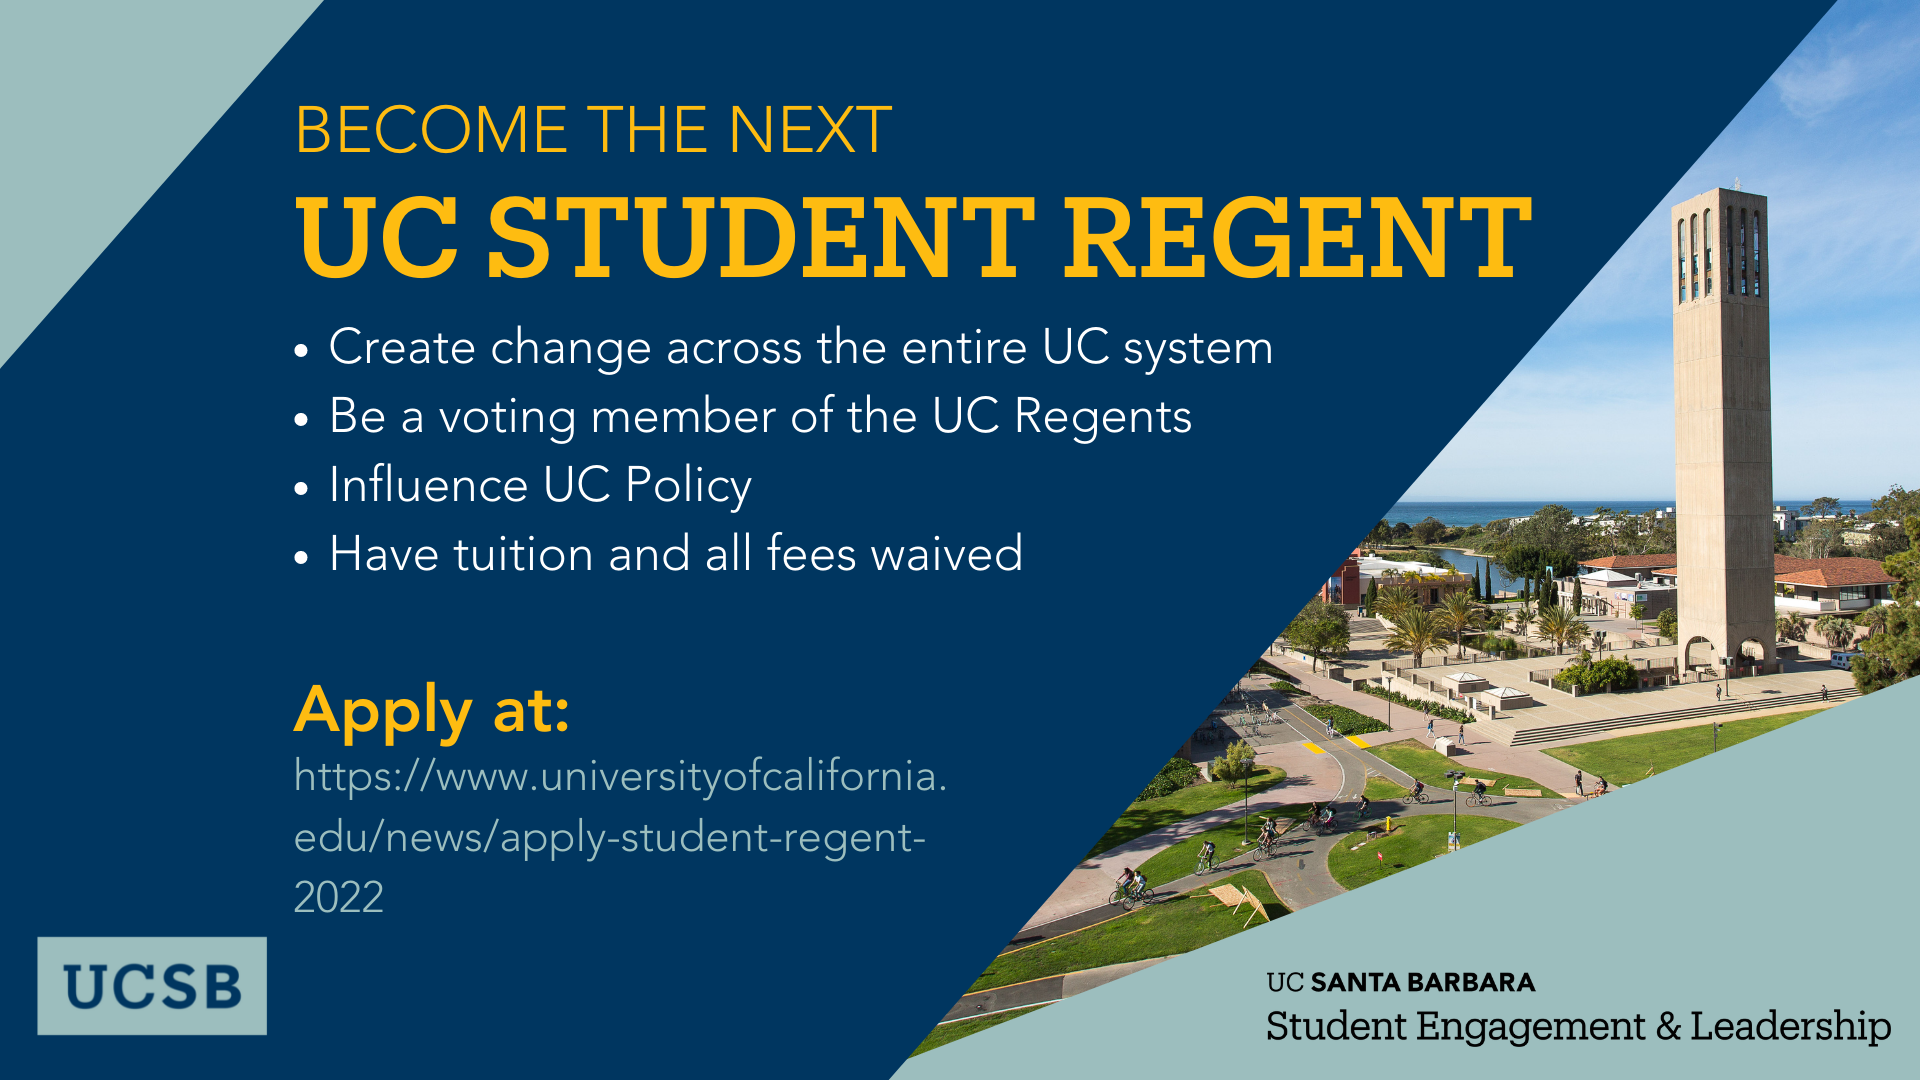 Help create change across the entire UC system and the be student voice to the UC Regents